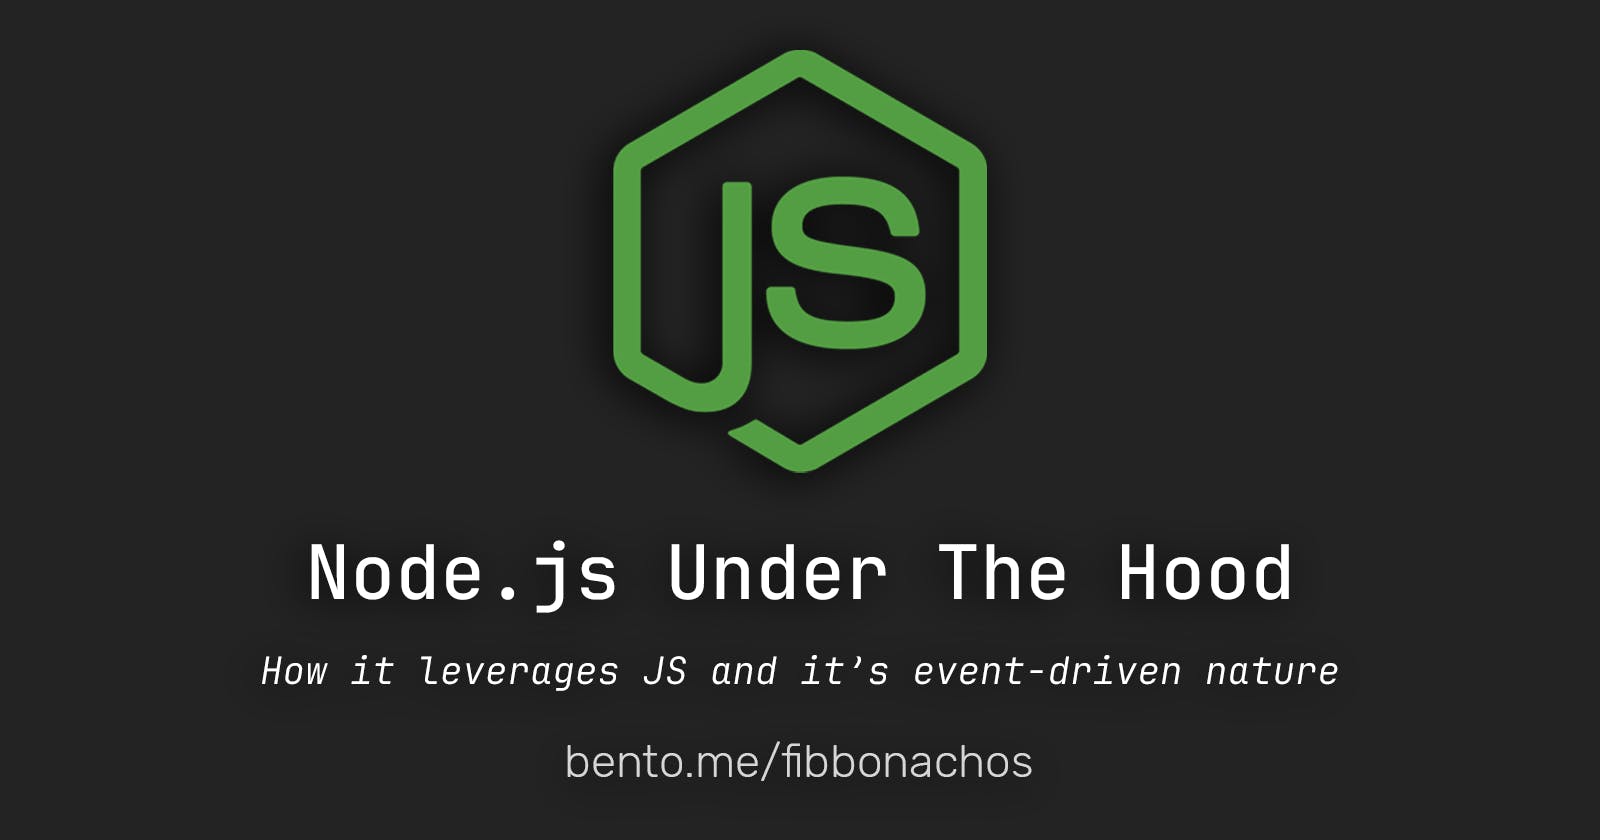 Node.js Under the Hood: How It Leverages JavaScript, Event-Driven I/O, libuv, and the Runtime Environment to Create Performant Applications